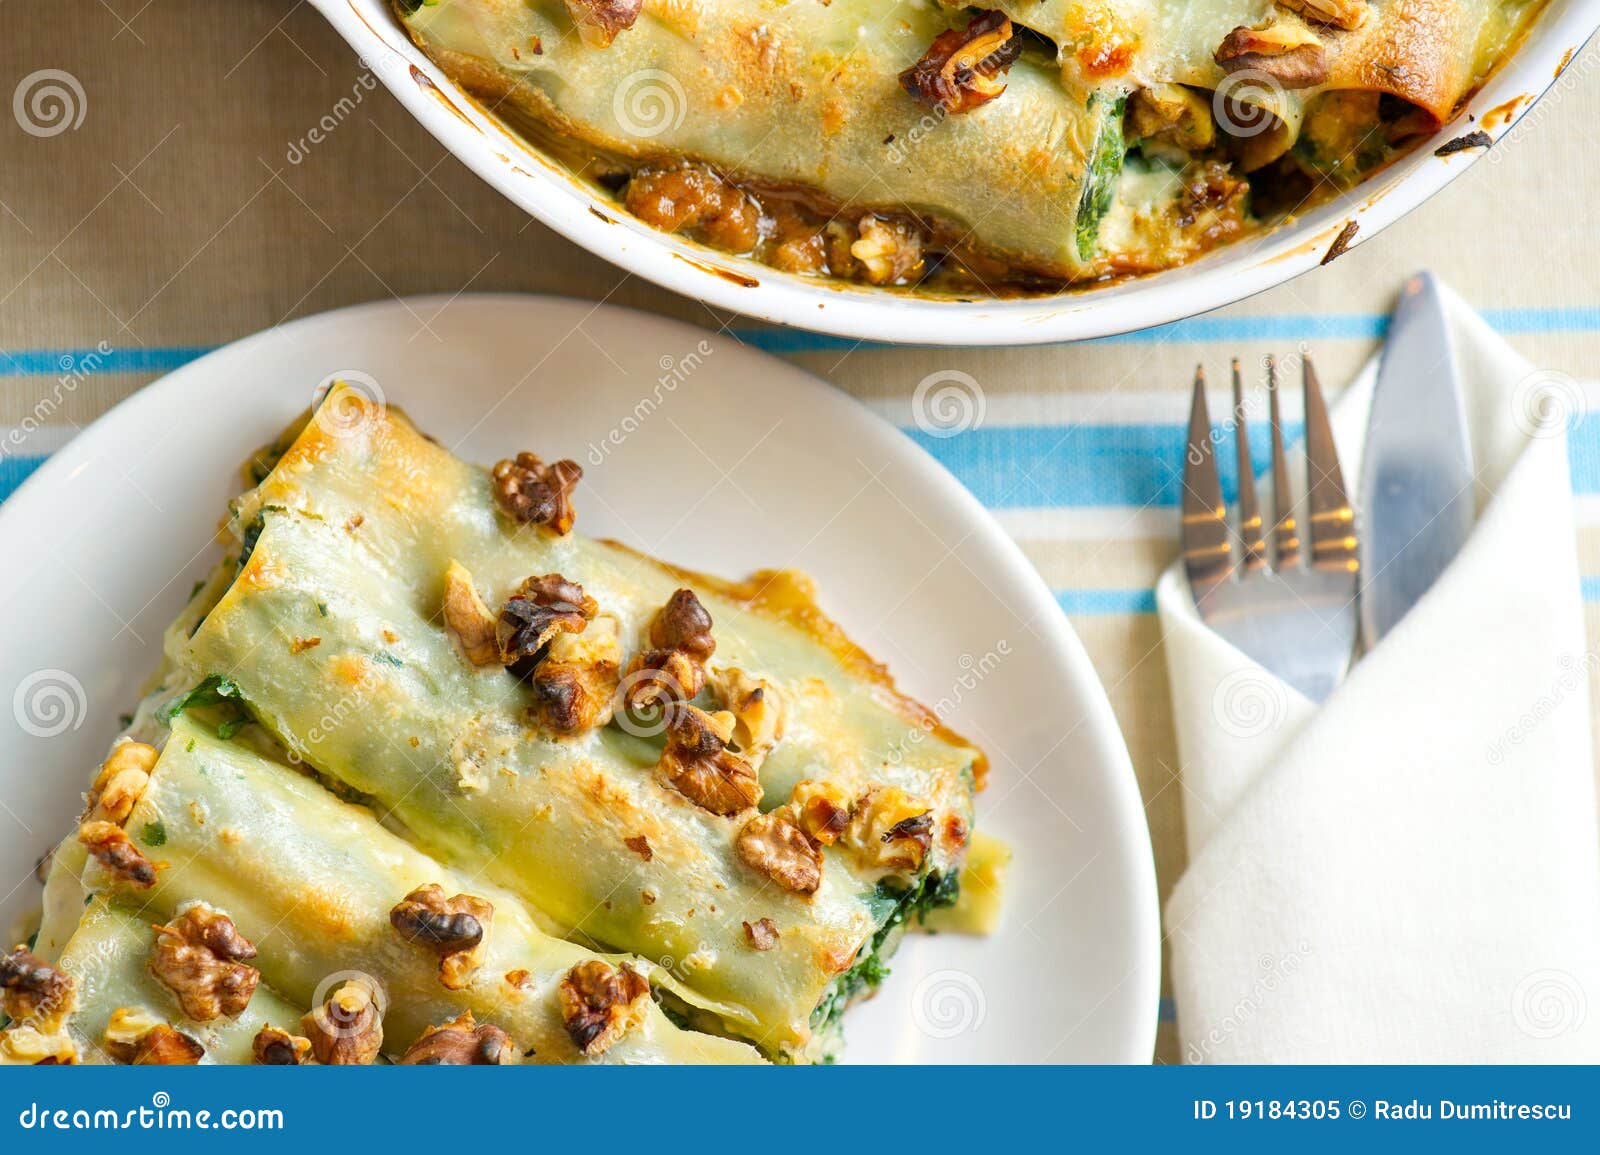 cannelloni with spinach